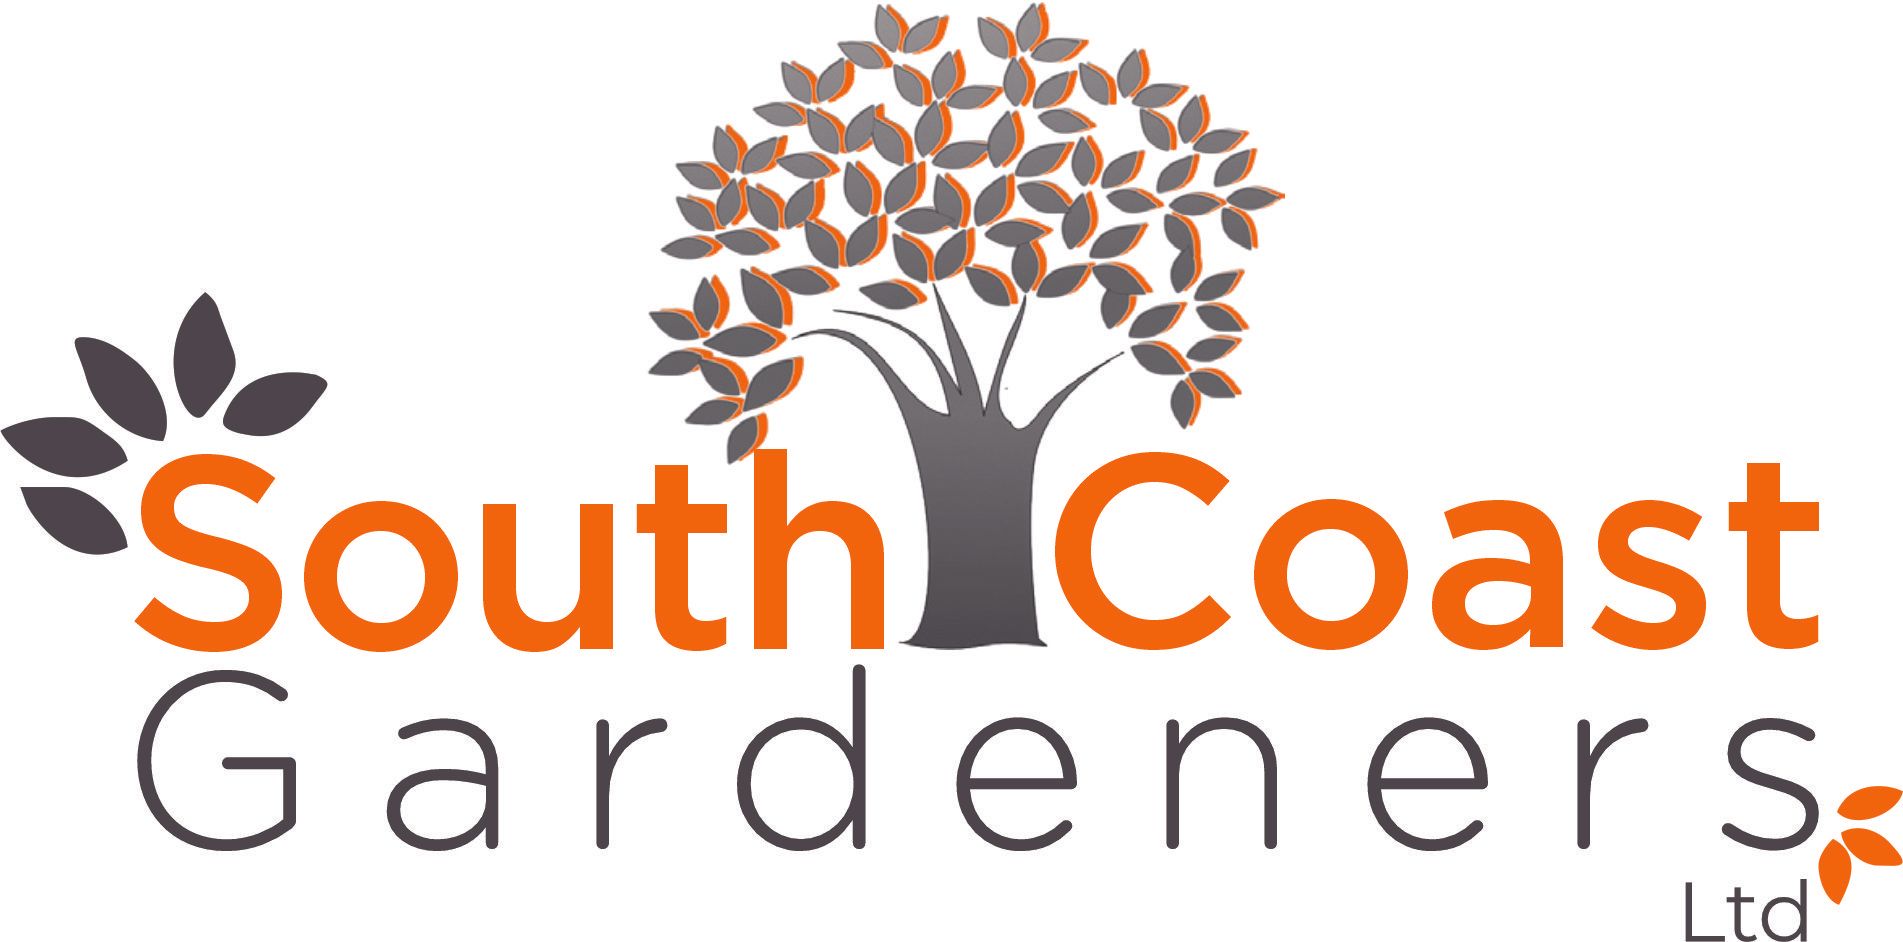 South Coast Gardeners Logo With Graphic Of Tree